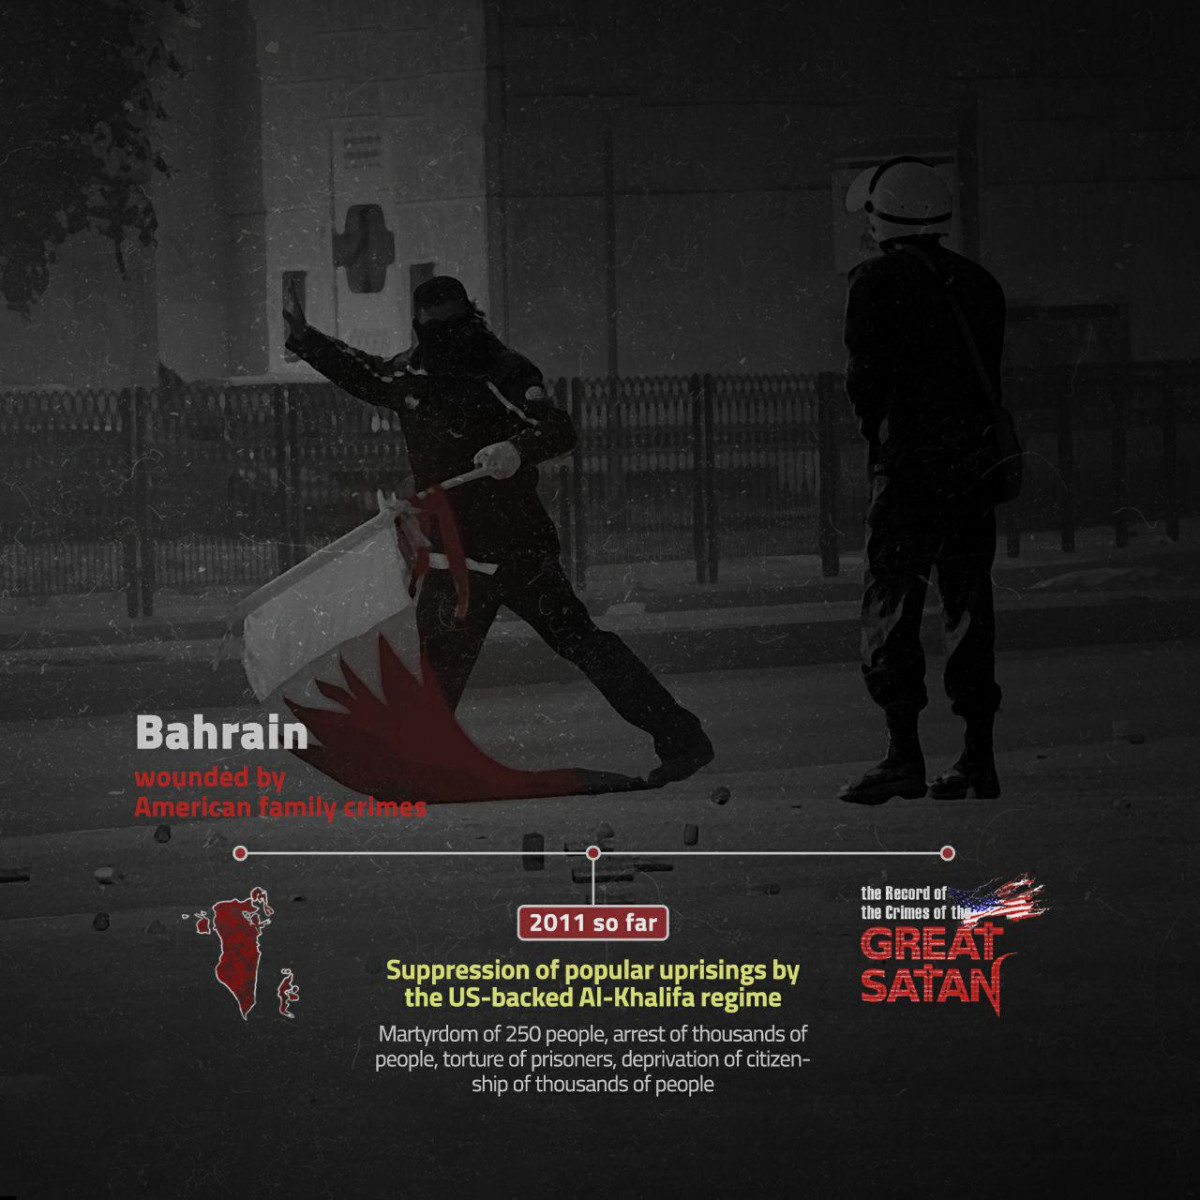 Bahrain wounded by American family crimes